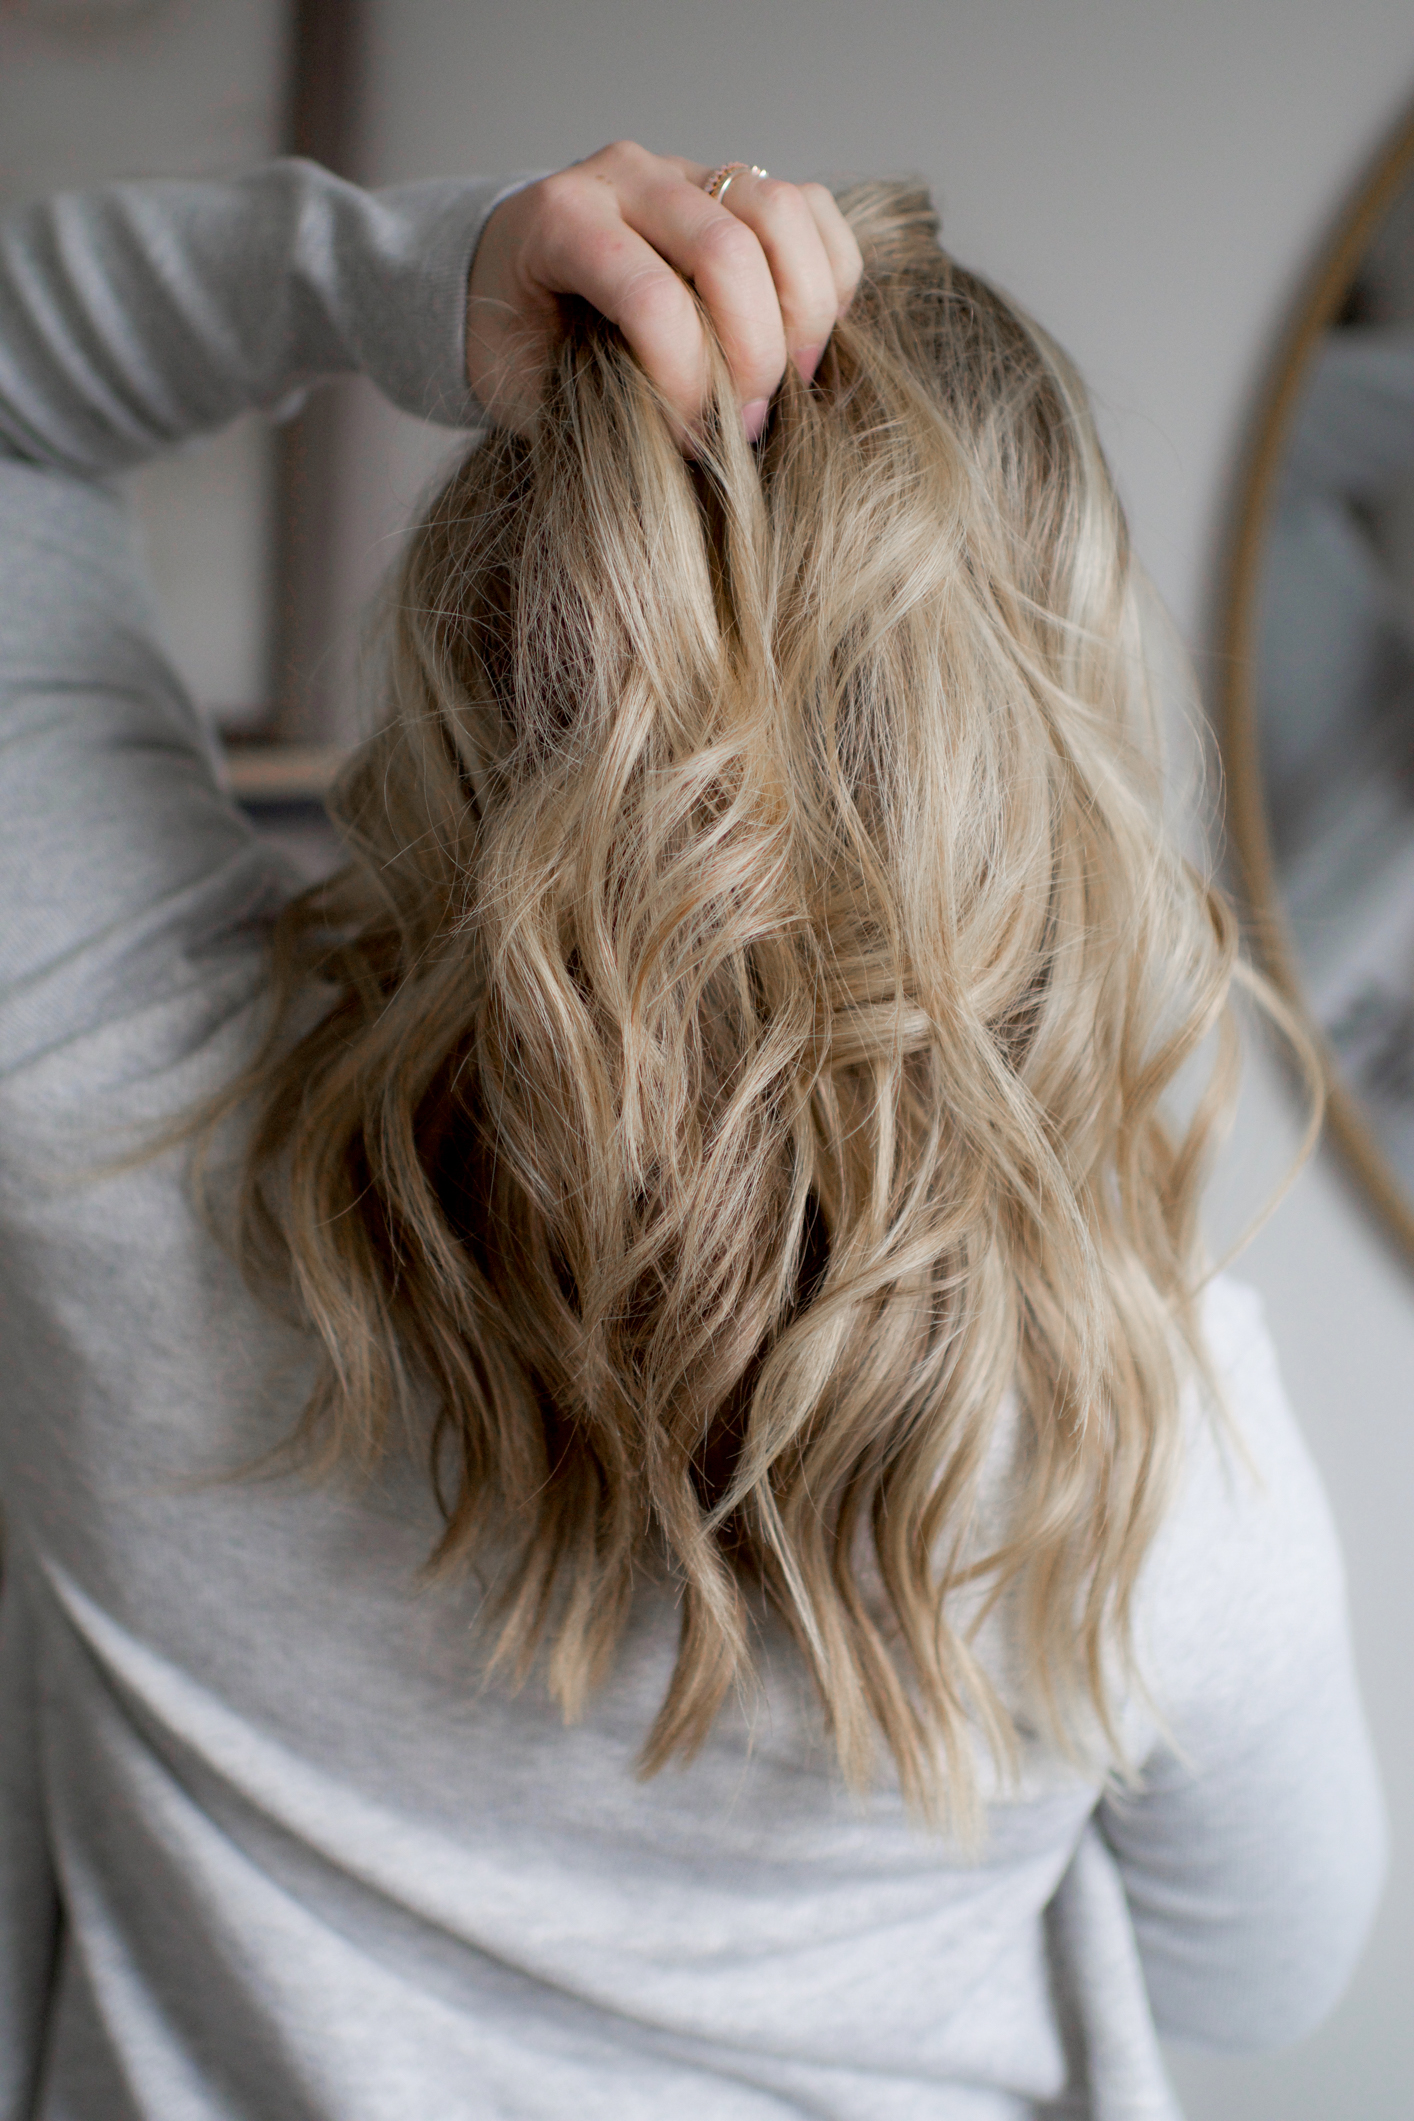 3 *free* ways to take better care of your hair